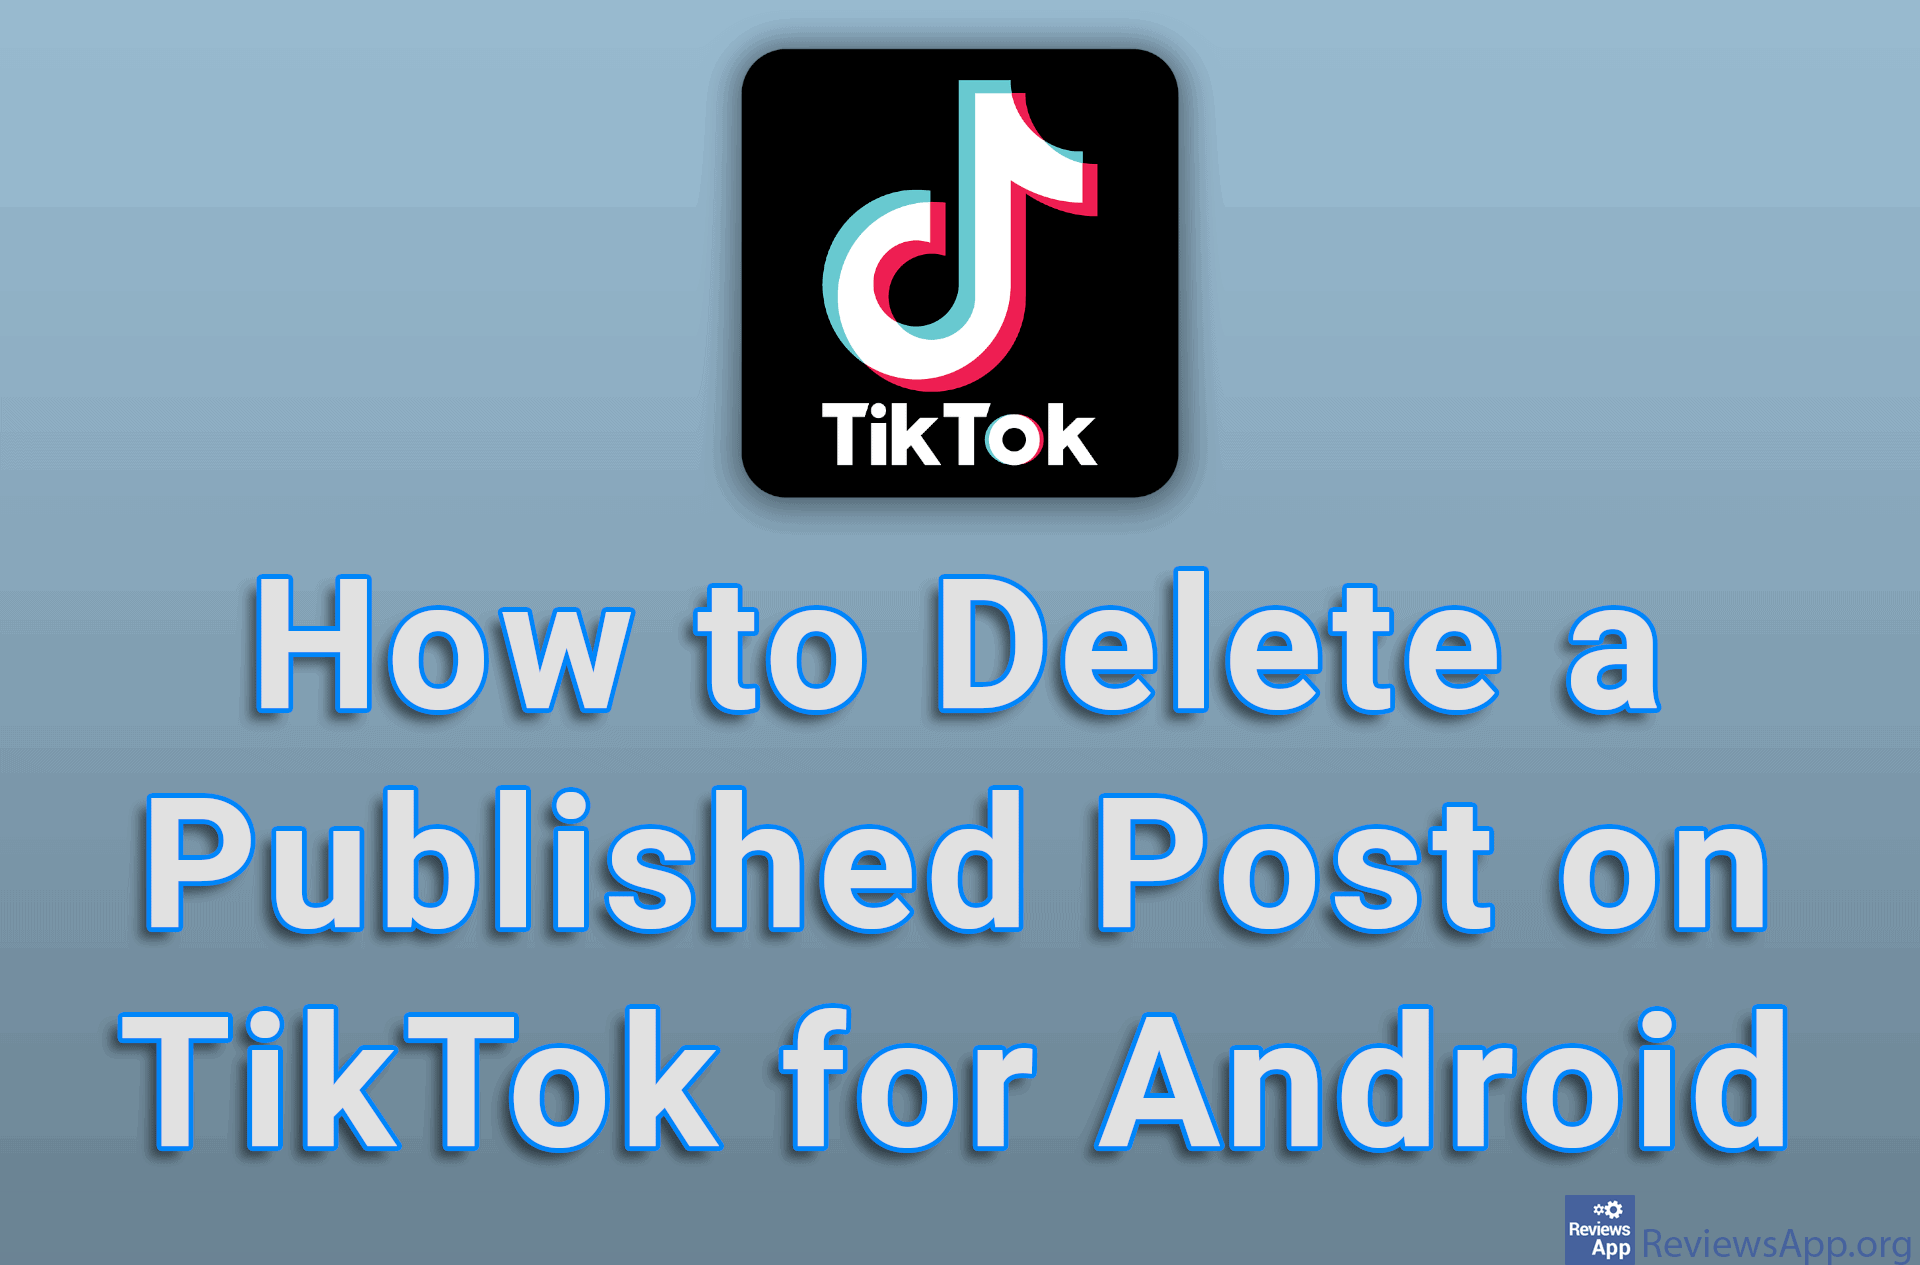 How to Delete a Published Post on TikTok for Android